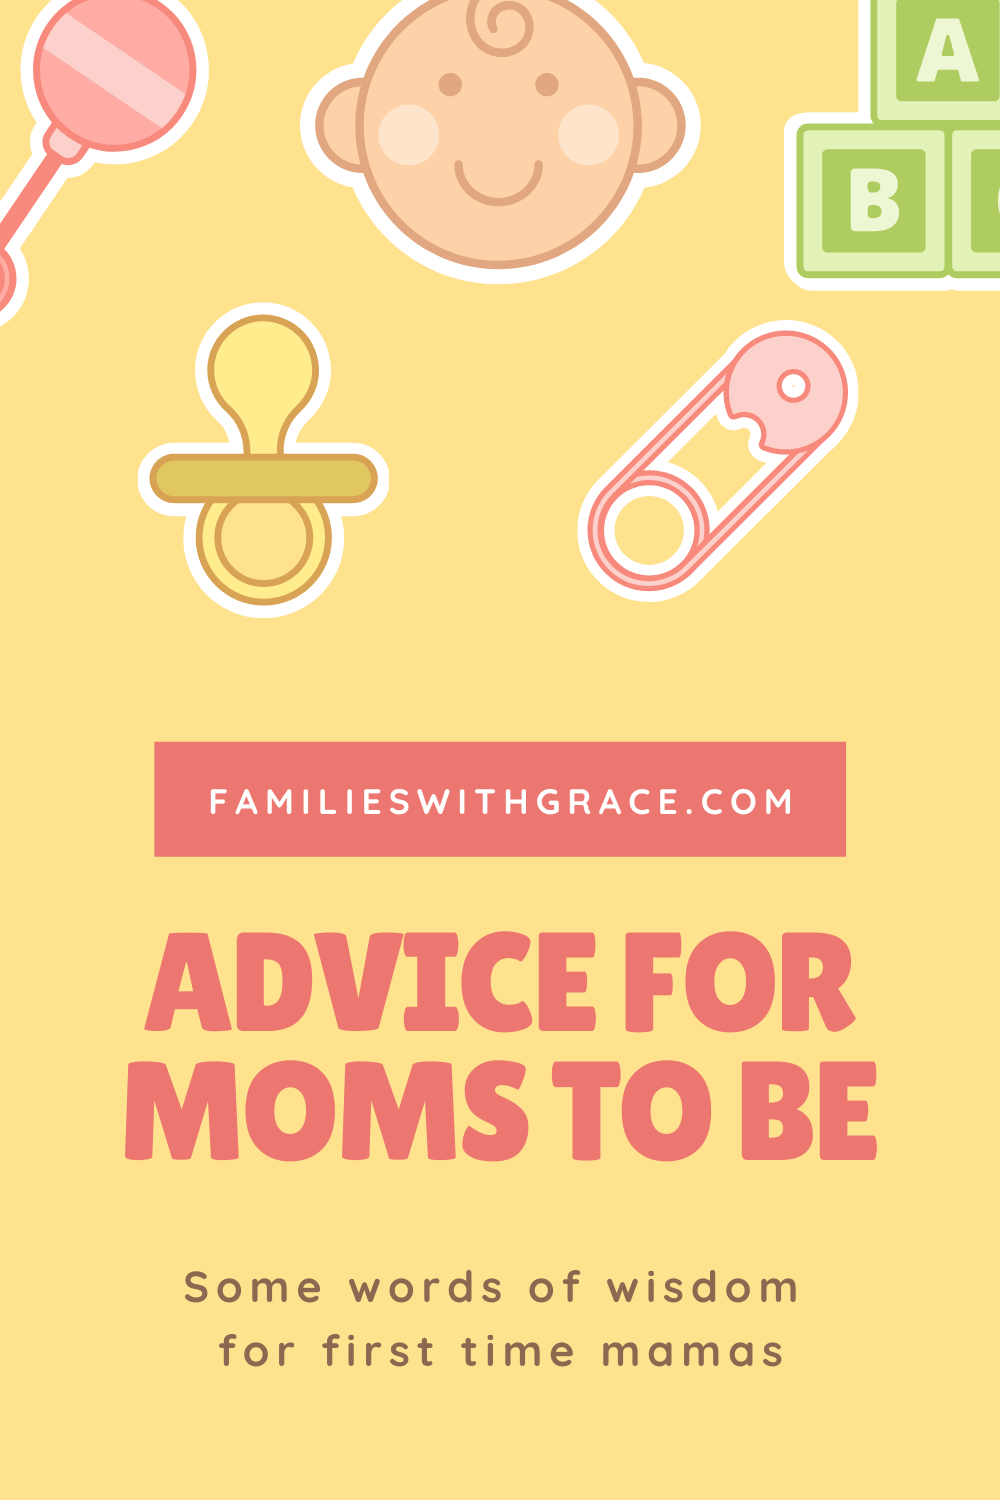 Advice for moms to be